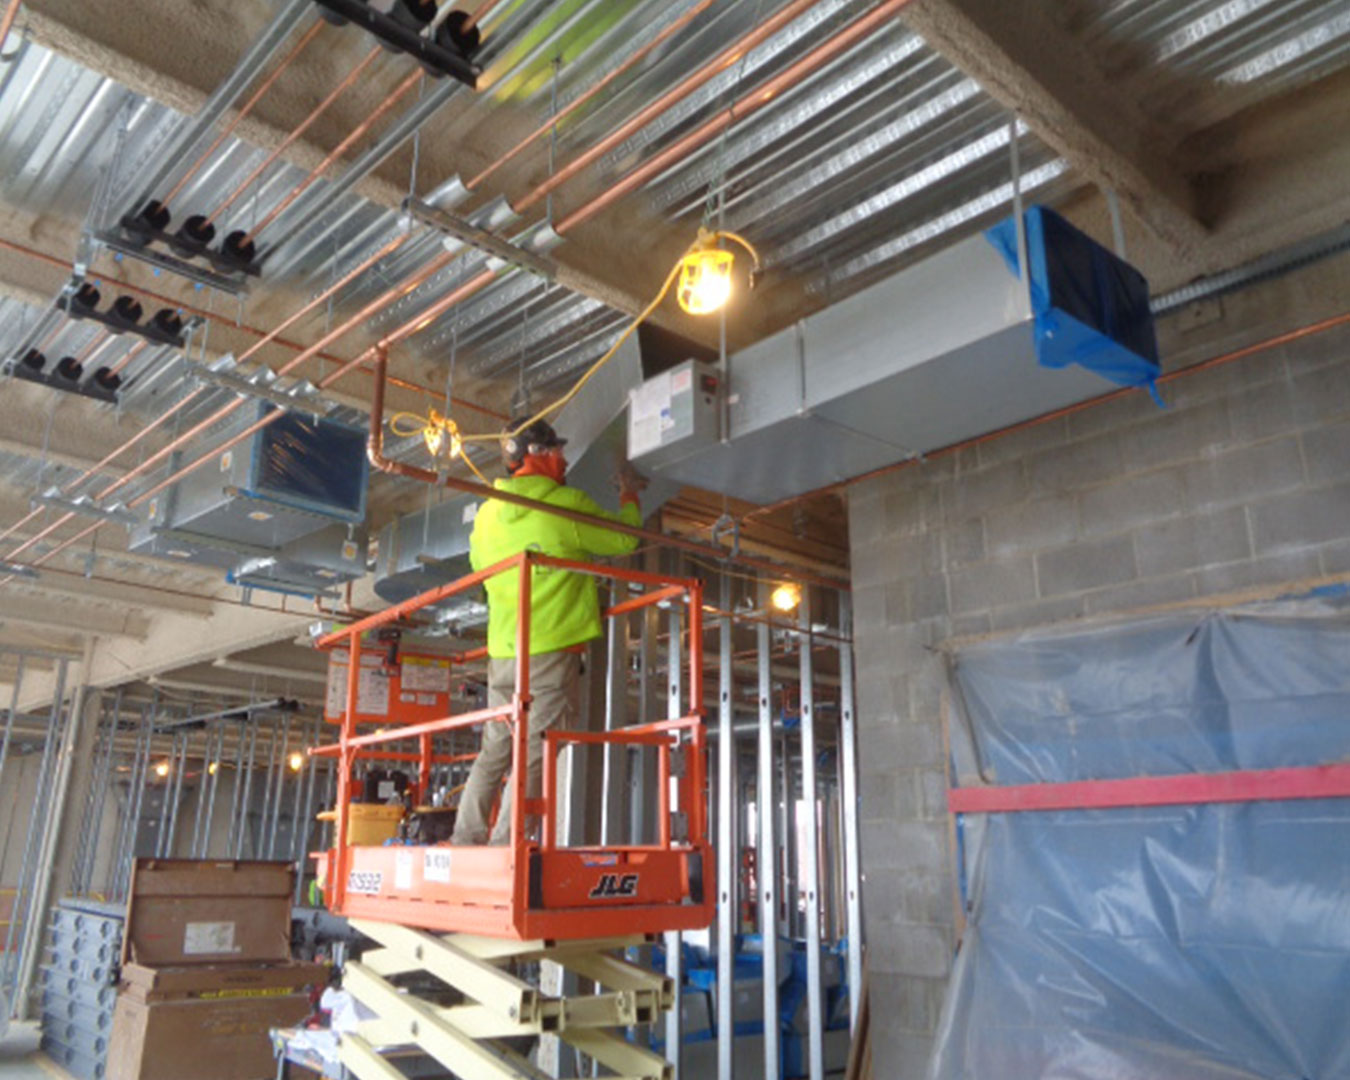 worker on a hydraulic lift installing ventilation duct